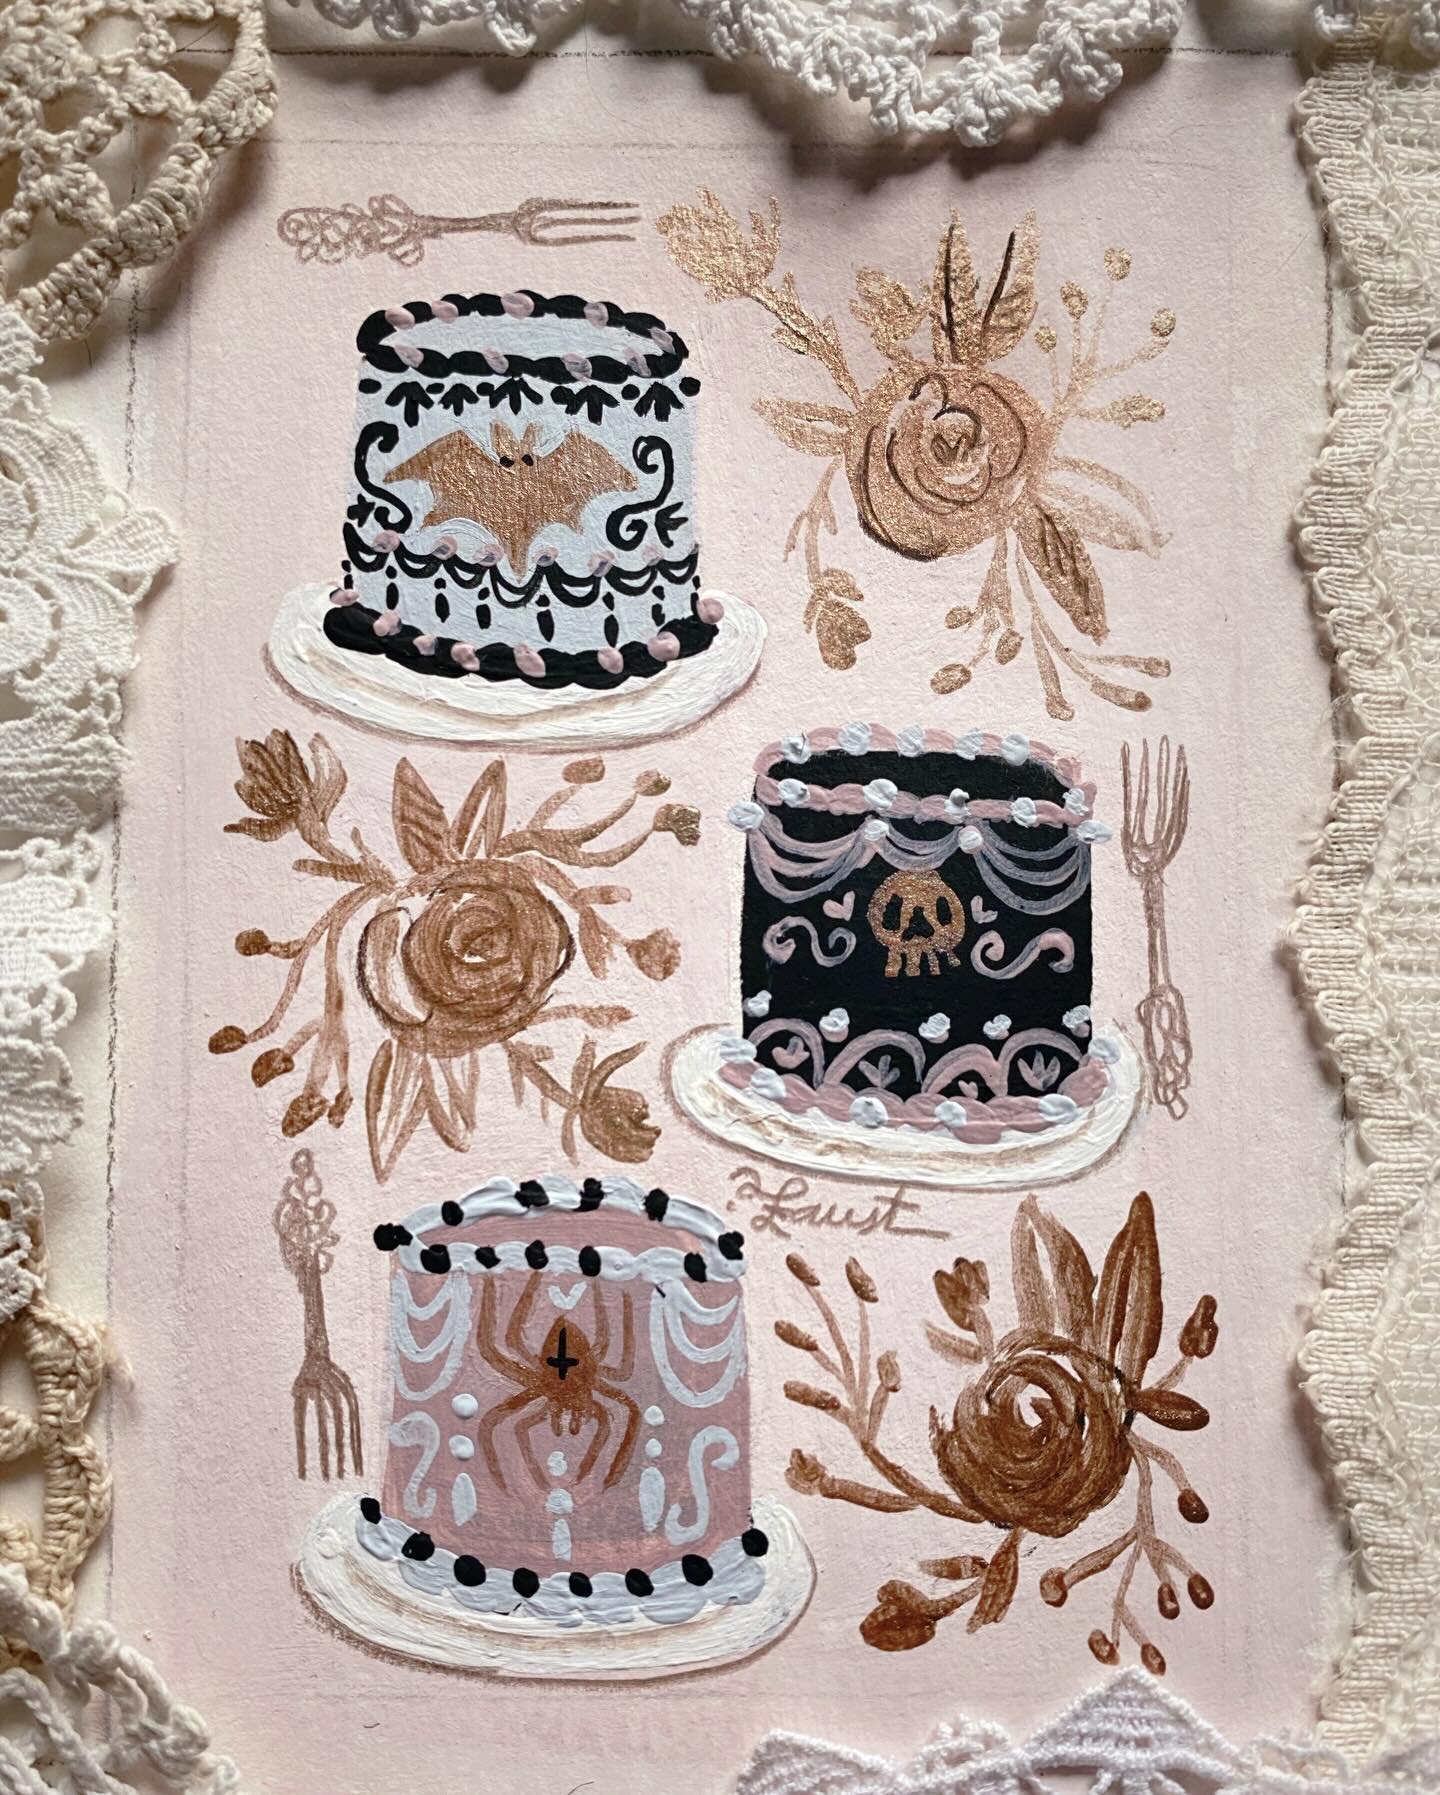 Day 13/14: Harvest✨ I have a fine cake harvest for you today!✨🍰🌾 Fancy little cakes decorated with glimmering spooky details - there&rsquo;s truly nothing better! 🦇💀🕷️🎀🍽️

✨I&rsquo;ve been quite enjoying adding in metallic details lately. Swip